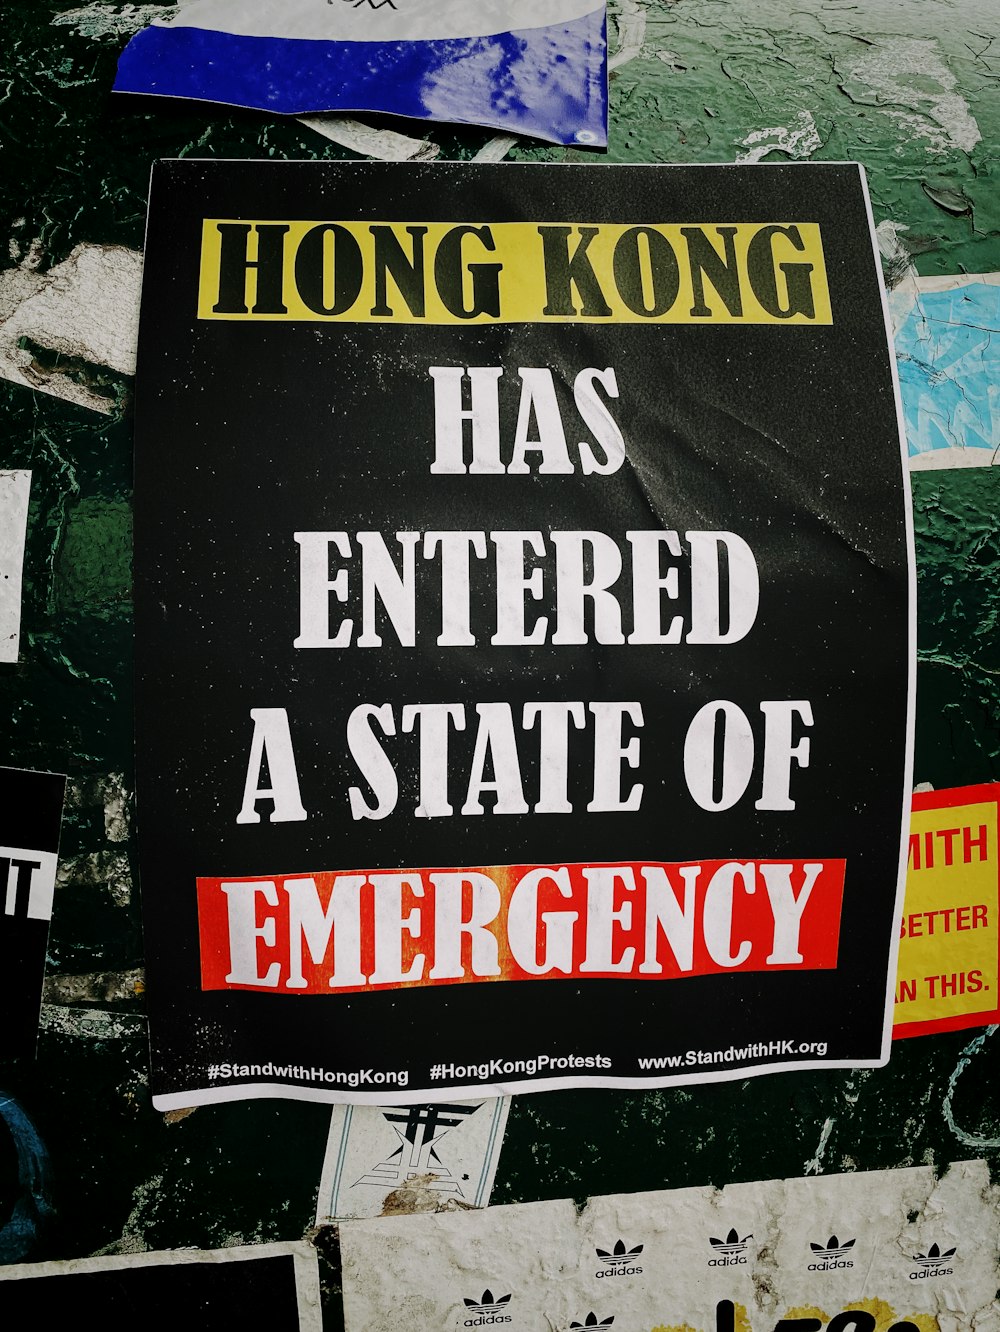 Hong Kong has entered a state of Emergency sign